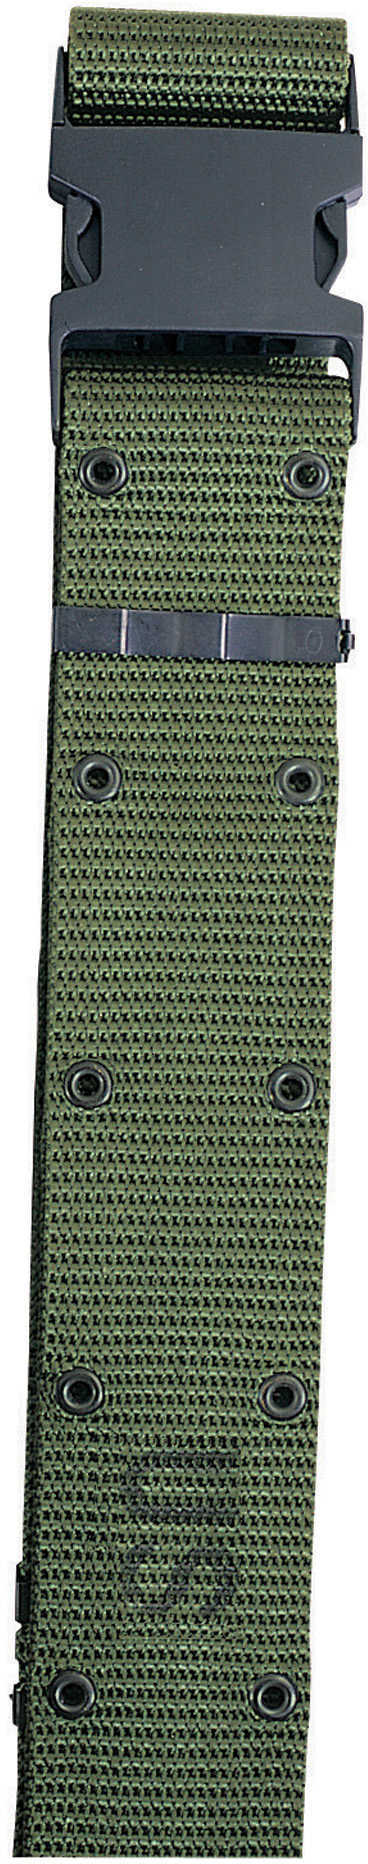 Bianchi Olive Drab Belt With Official Military Buckle Md: 13597